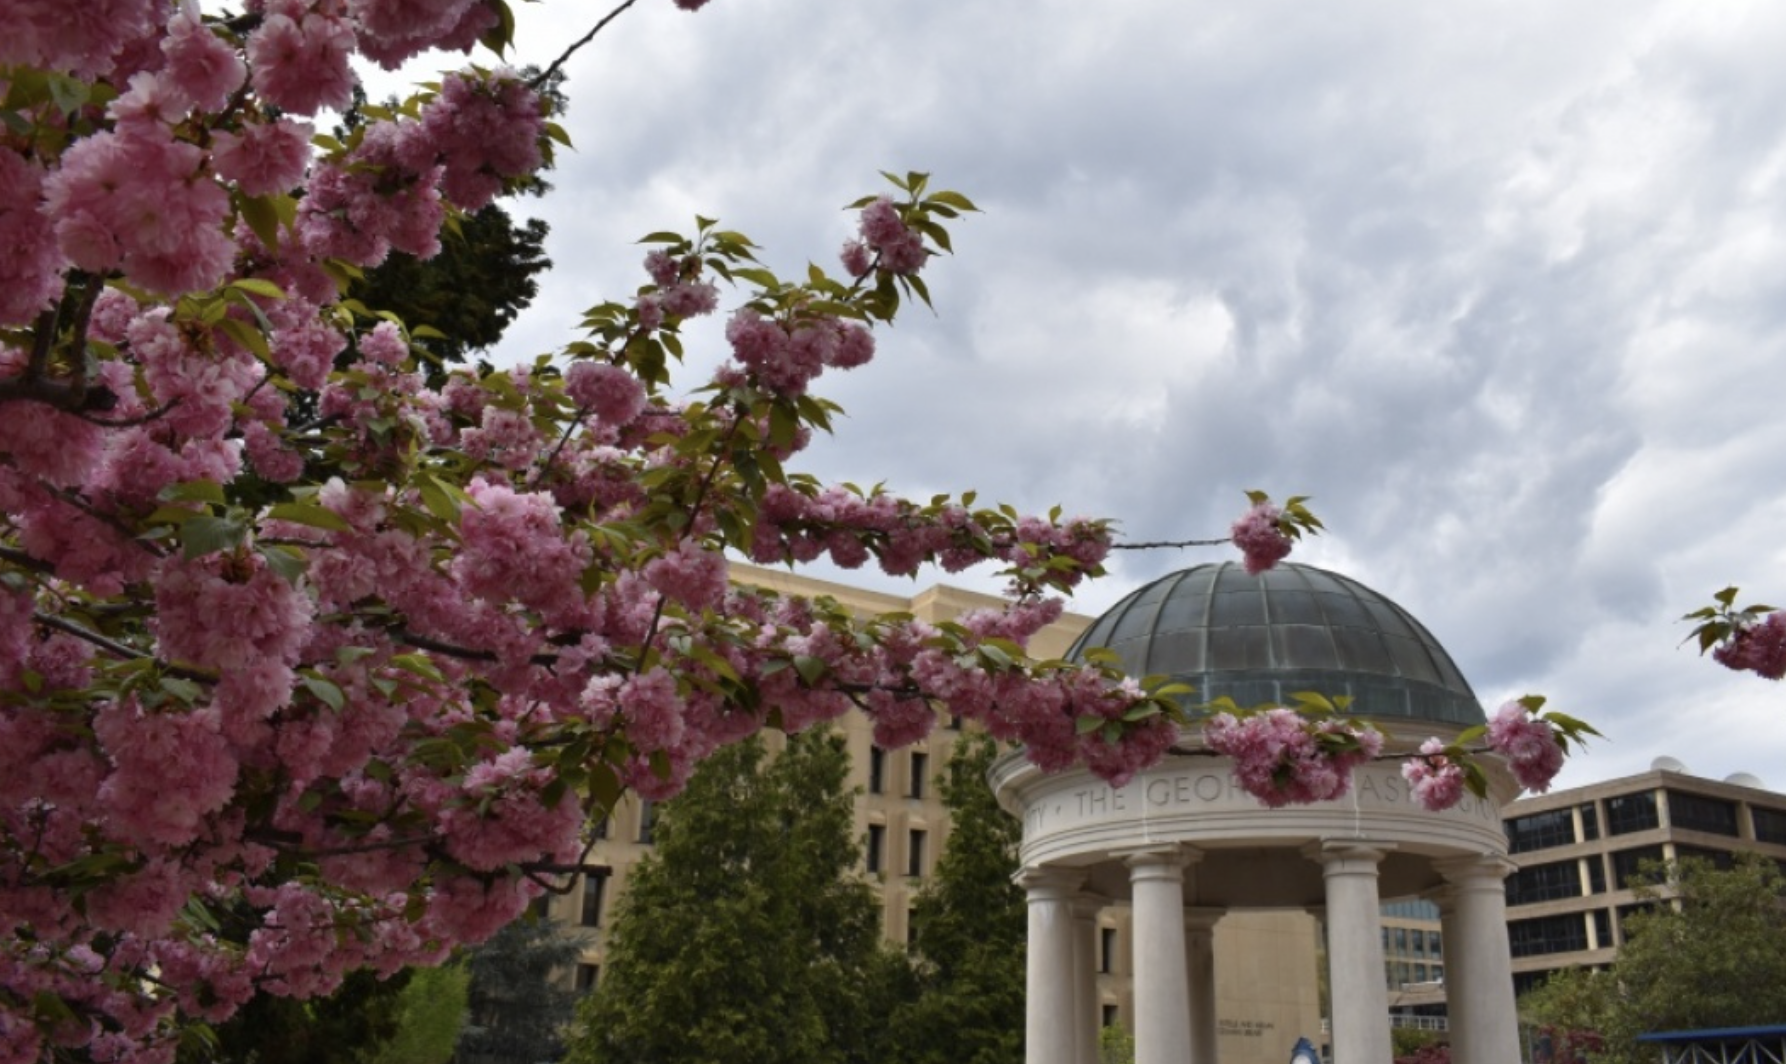 George Washington University Campus image with cherry blossoms in foreground